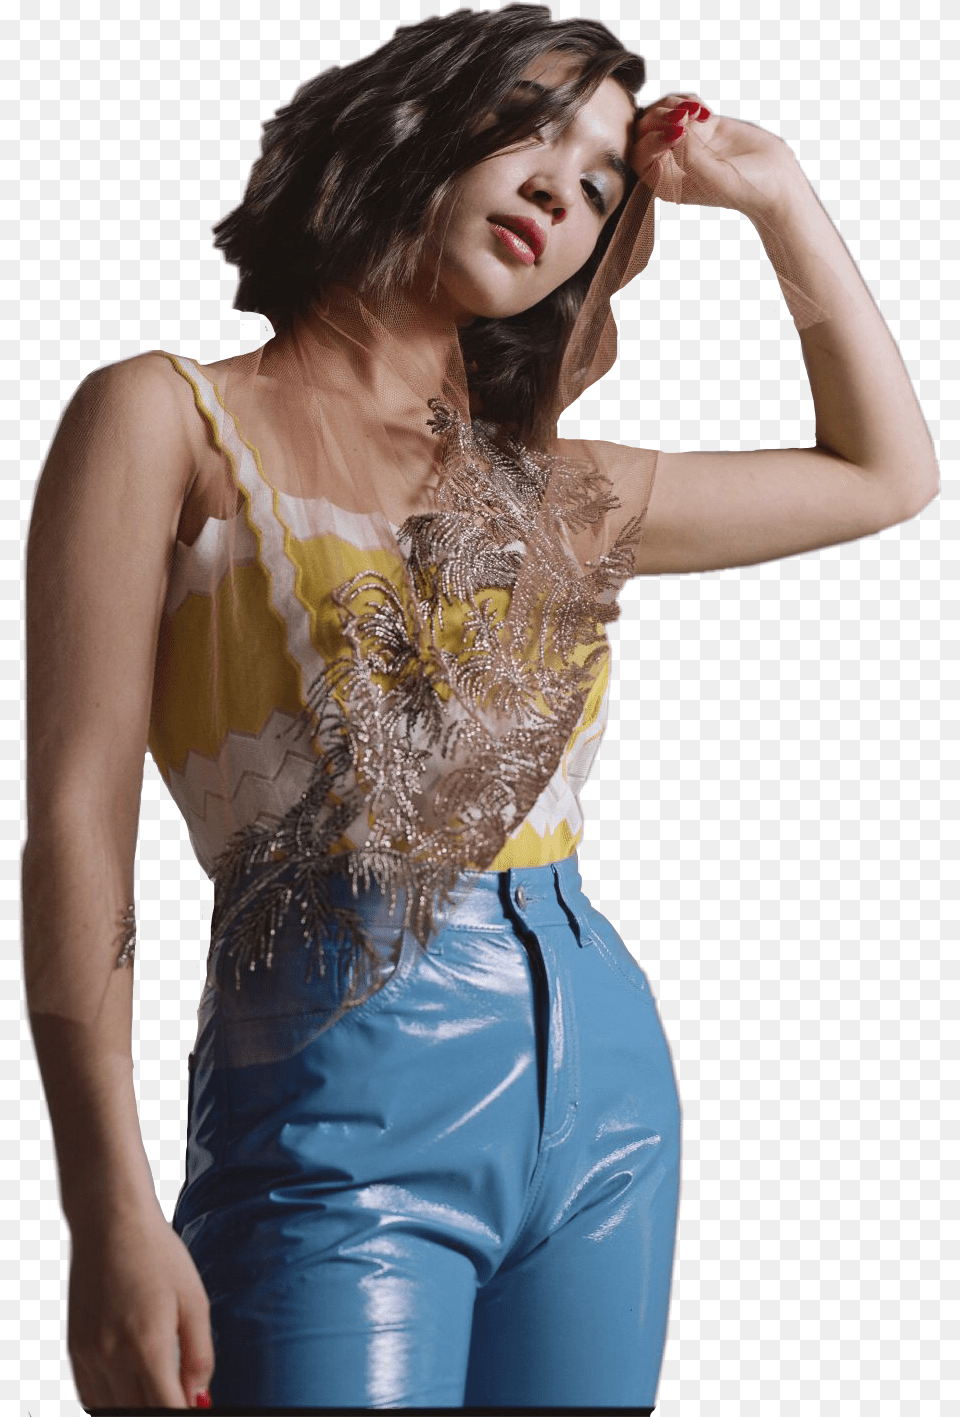 Report Abuse Rowan Blanchard, Adult, Person, Formal Wear, Female Free Png Download